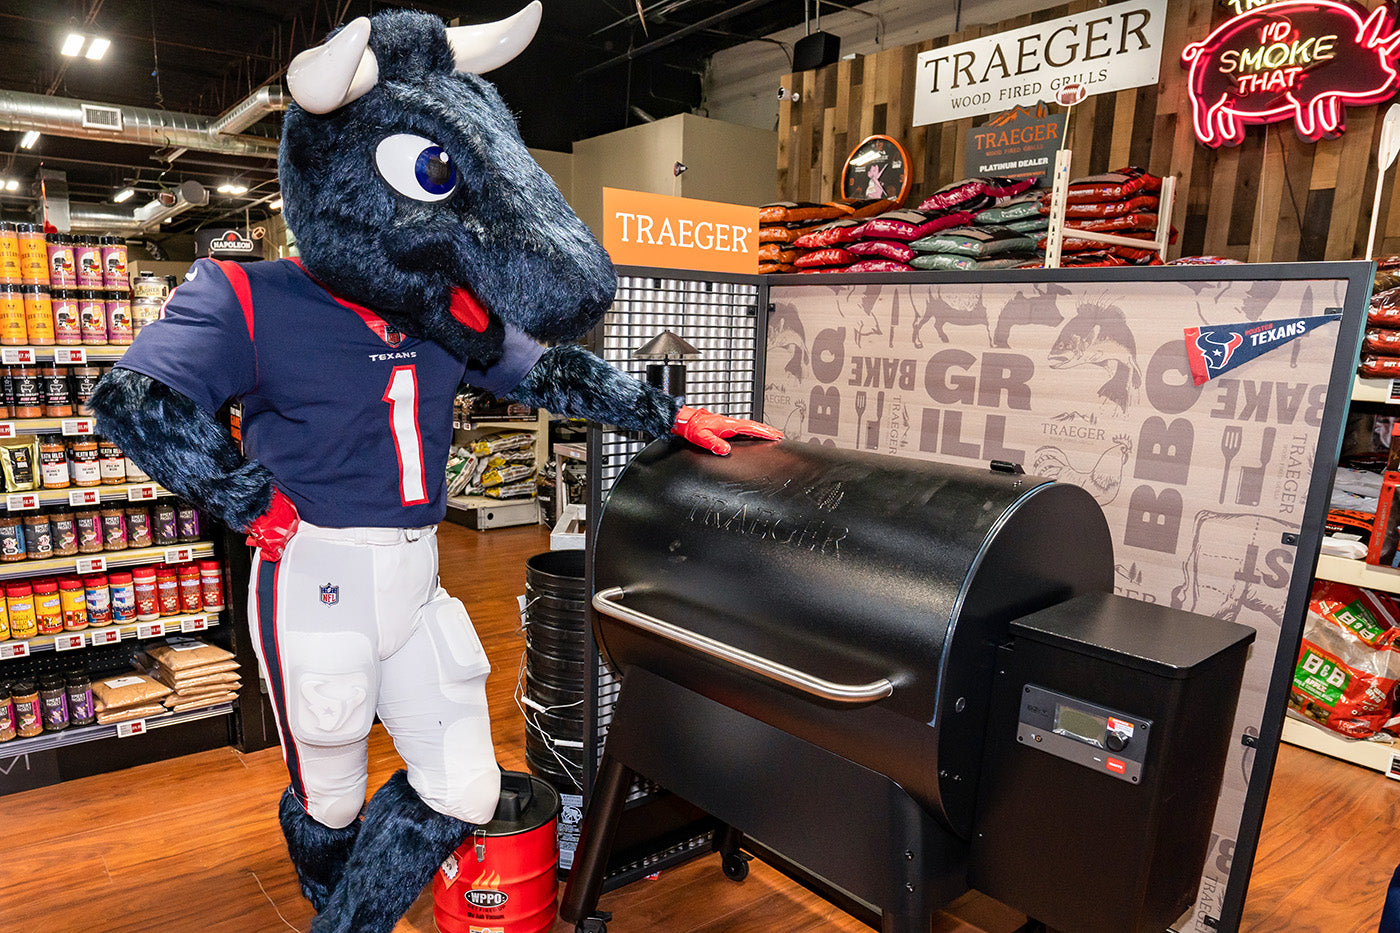 houston texans mascot, Toro with his Traeger Pro 780 wood pellet grill from Texas Star Grill Shop, Houston's #1 Traeger wood pellet grill dealer